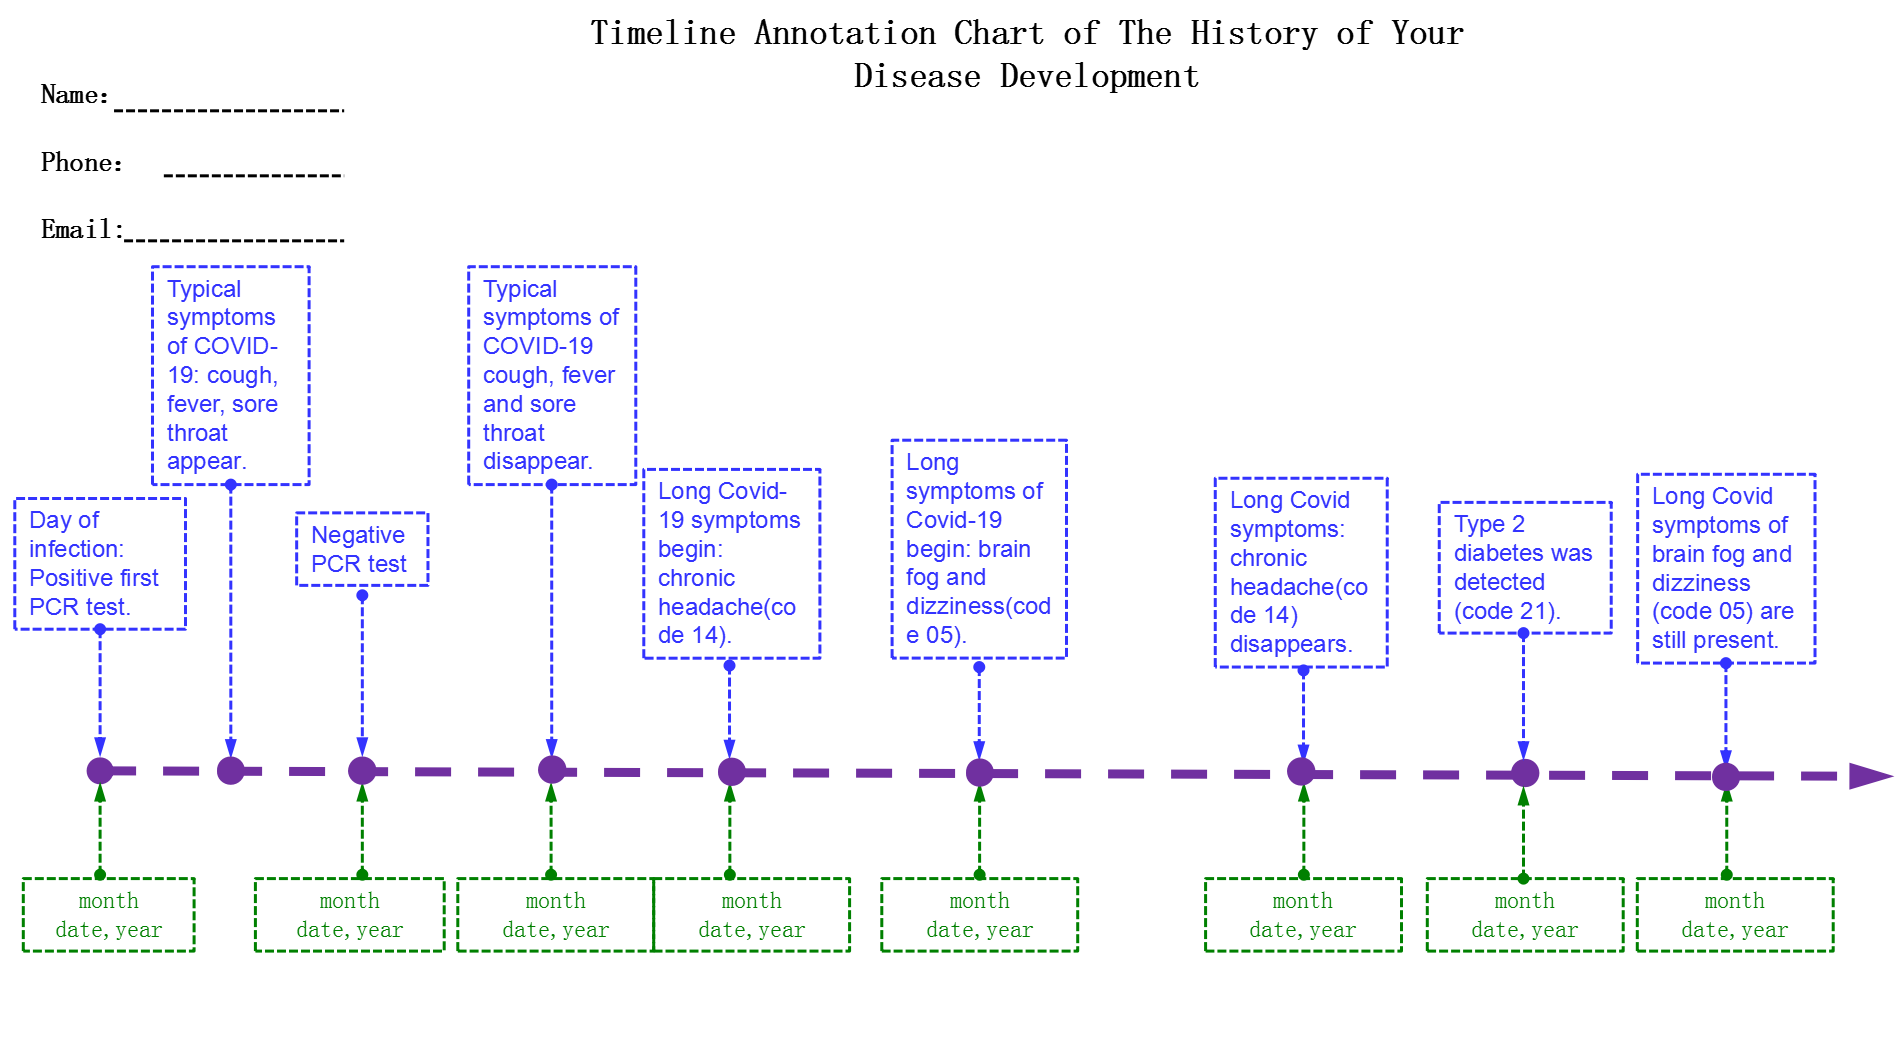 Timeline Annotation Chart of The History of Your Disease Development